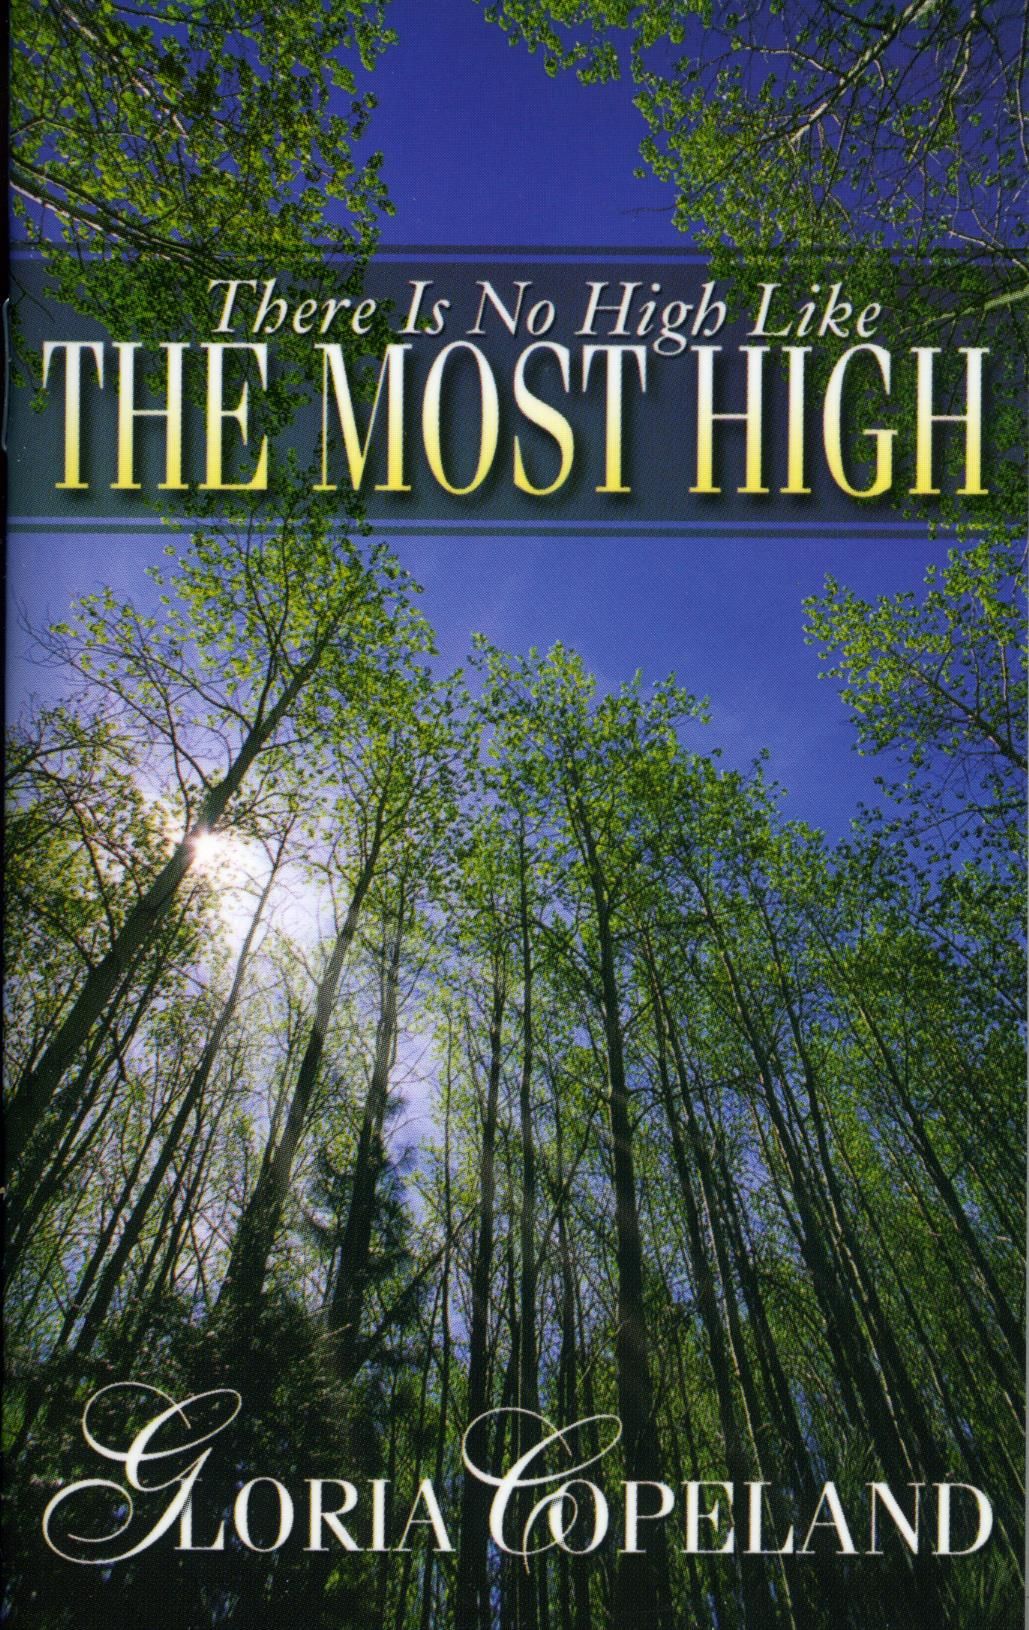 Englische Bücher - G. Copeland: There Is No High Like the Most High